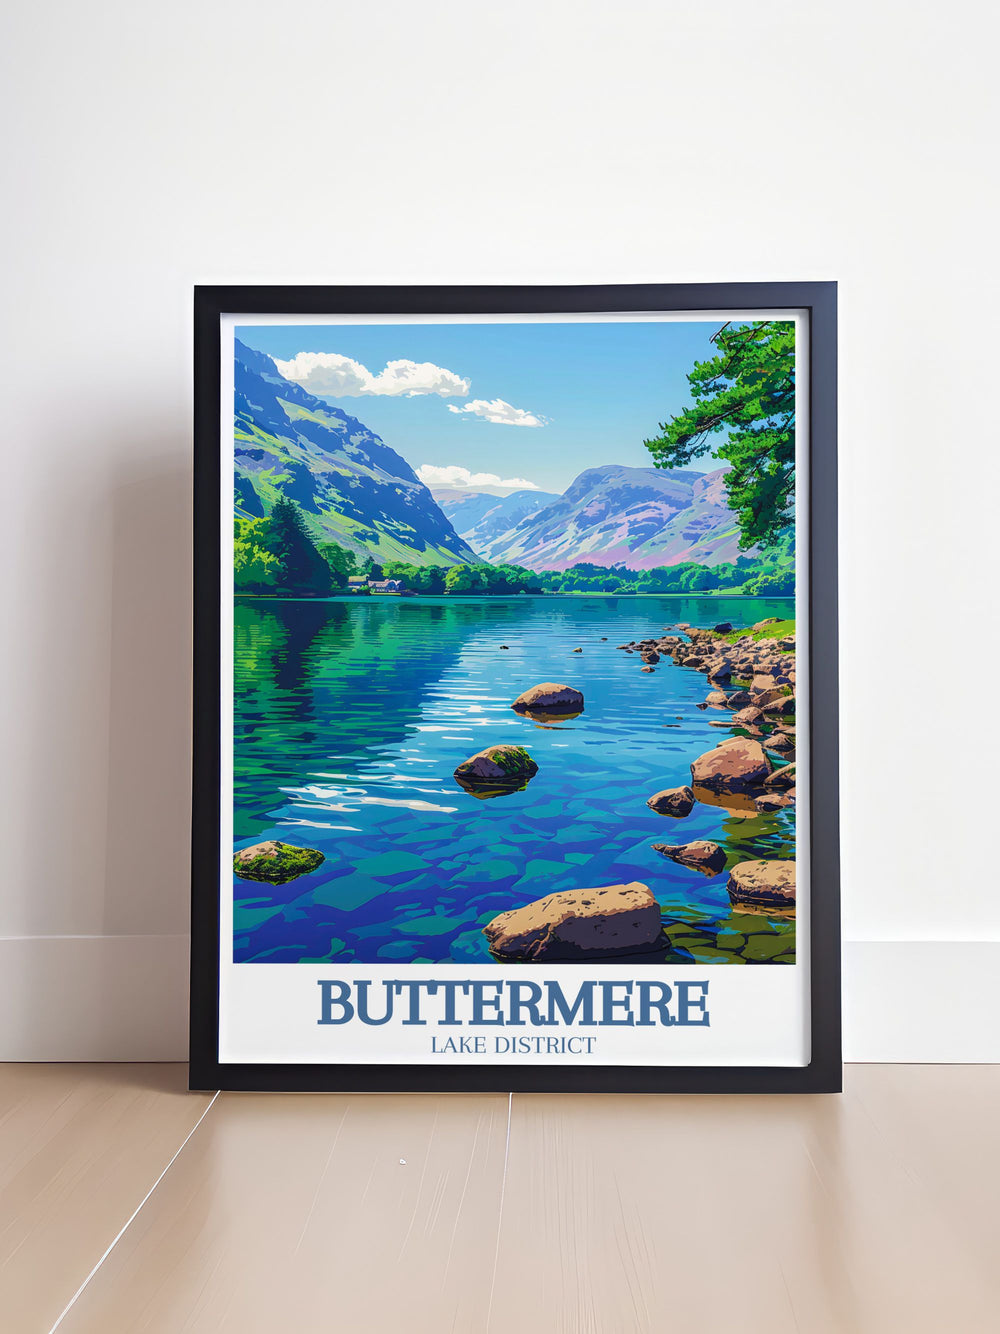 Showcasing the tranquil waters of Buttermere Lake and the rugged beauty of Haystacks, this art print highlights one of the Lake Districts most treasured locations, perfect for adventure seekers and nature lovers.